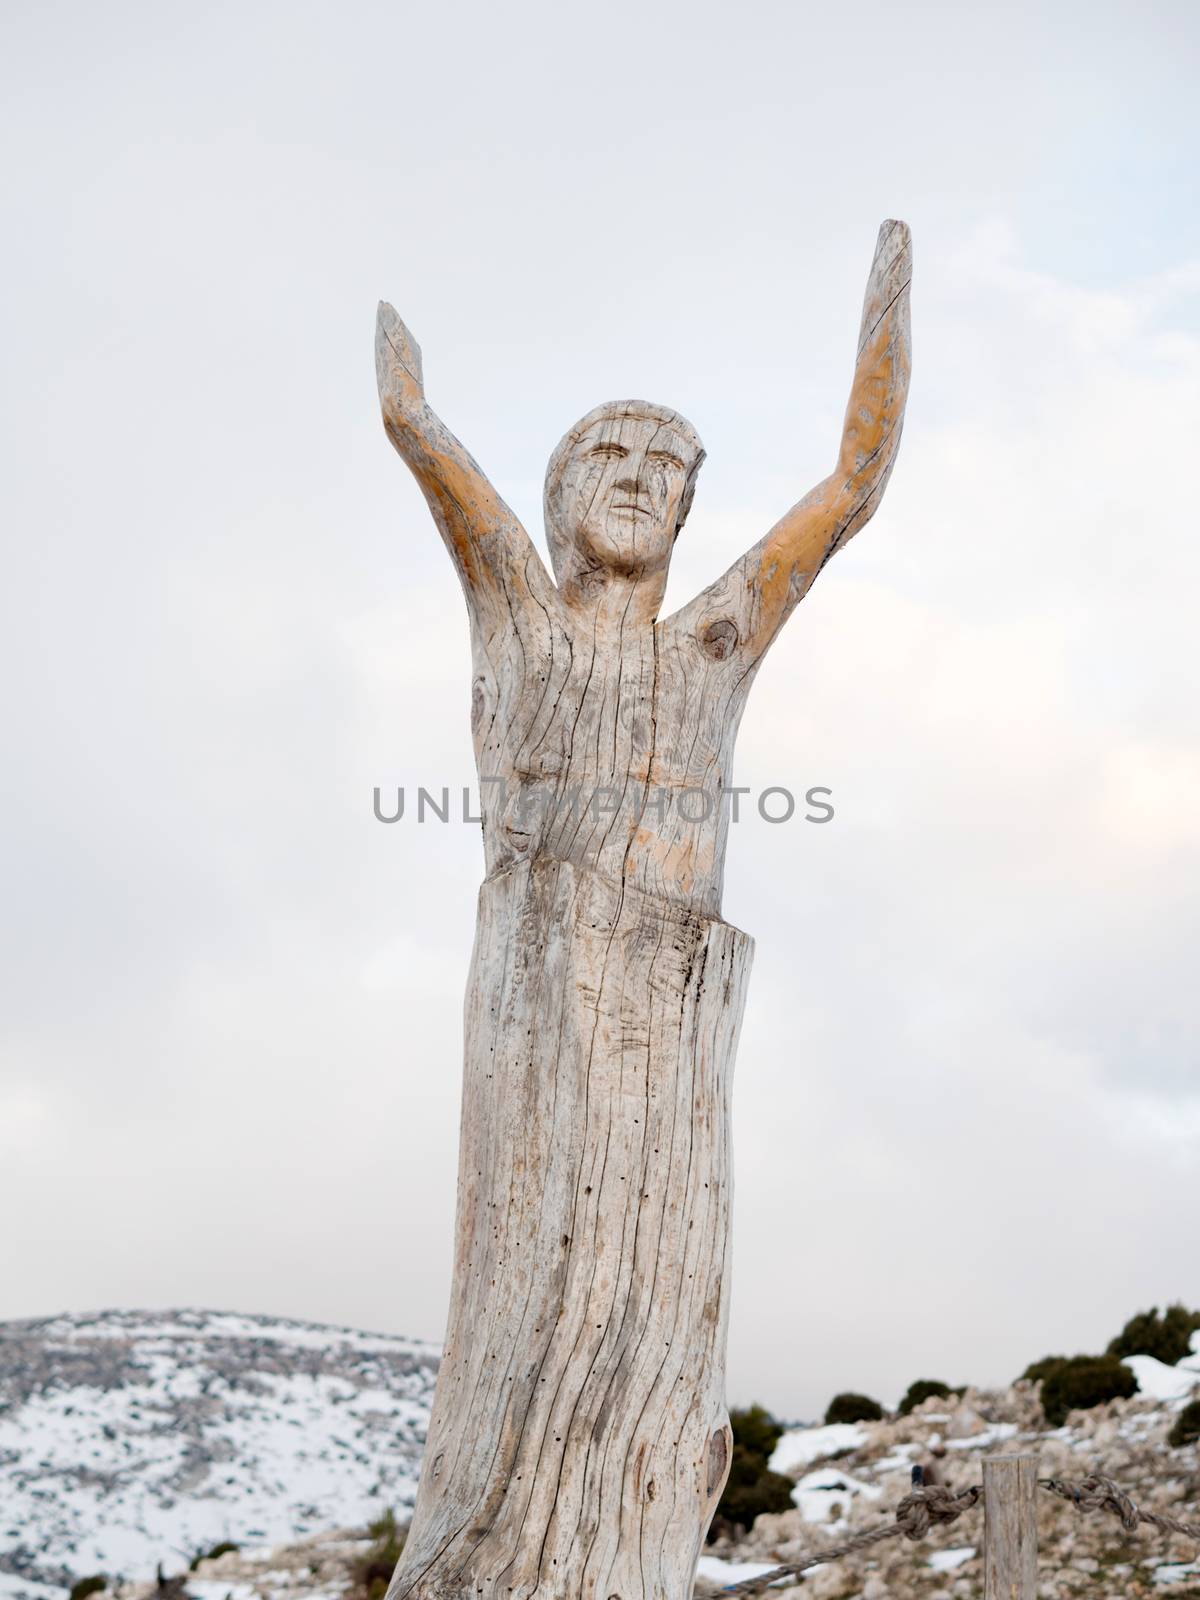 Athens, Greece -  04 January 2017: Wood carving sculptures at the park of lost souls with snow and cloudy sky at Parnitha, Athens, Greece